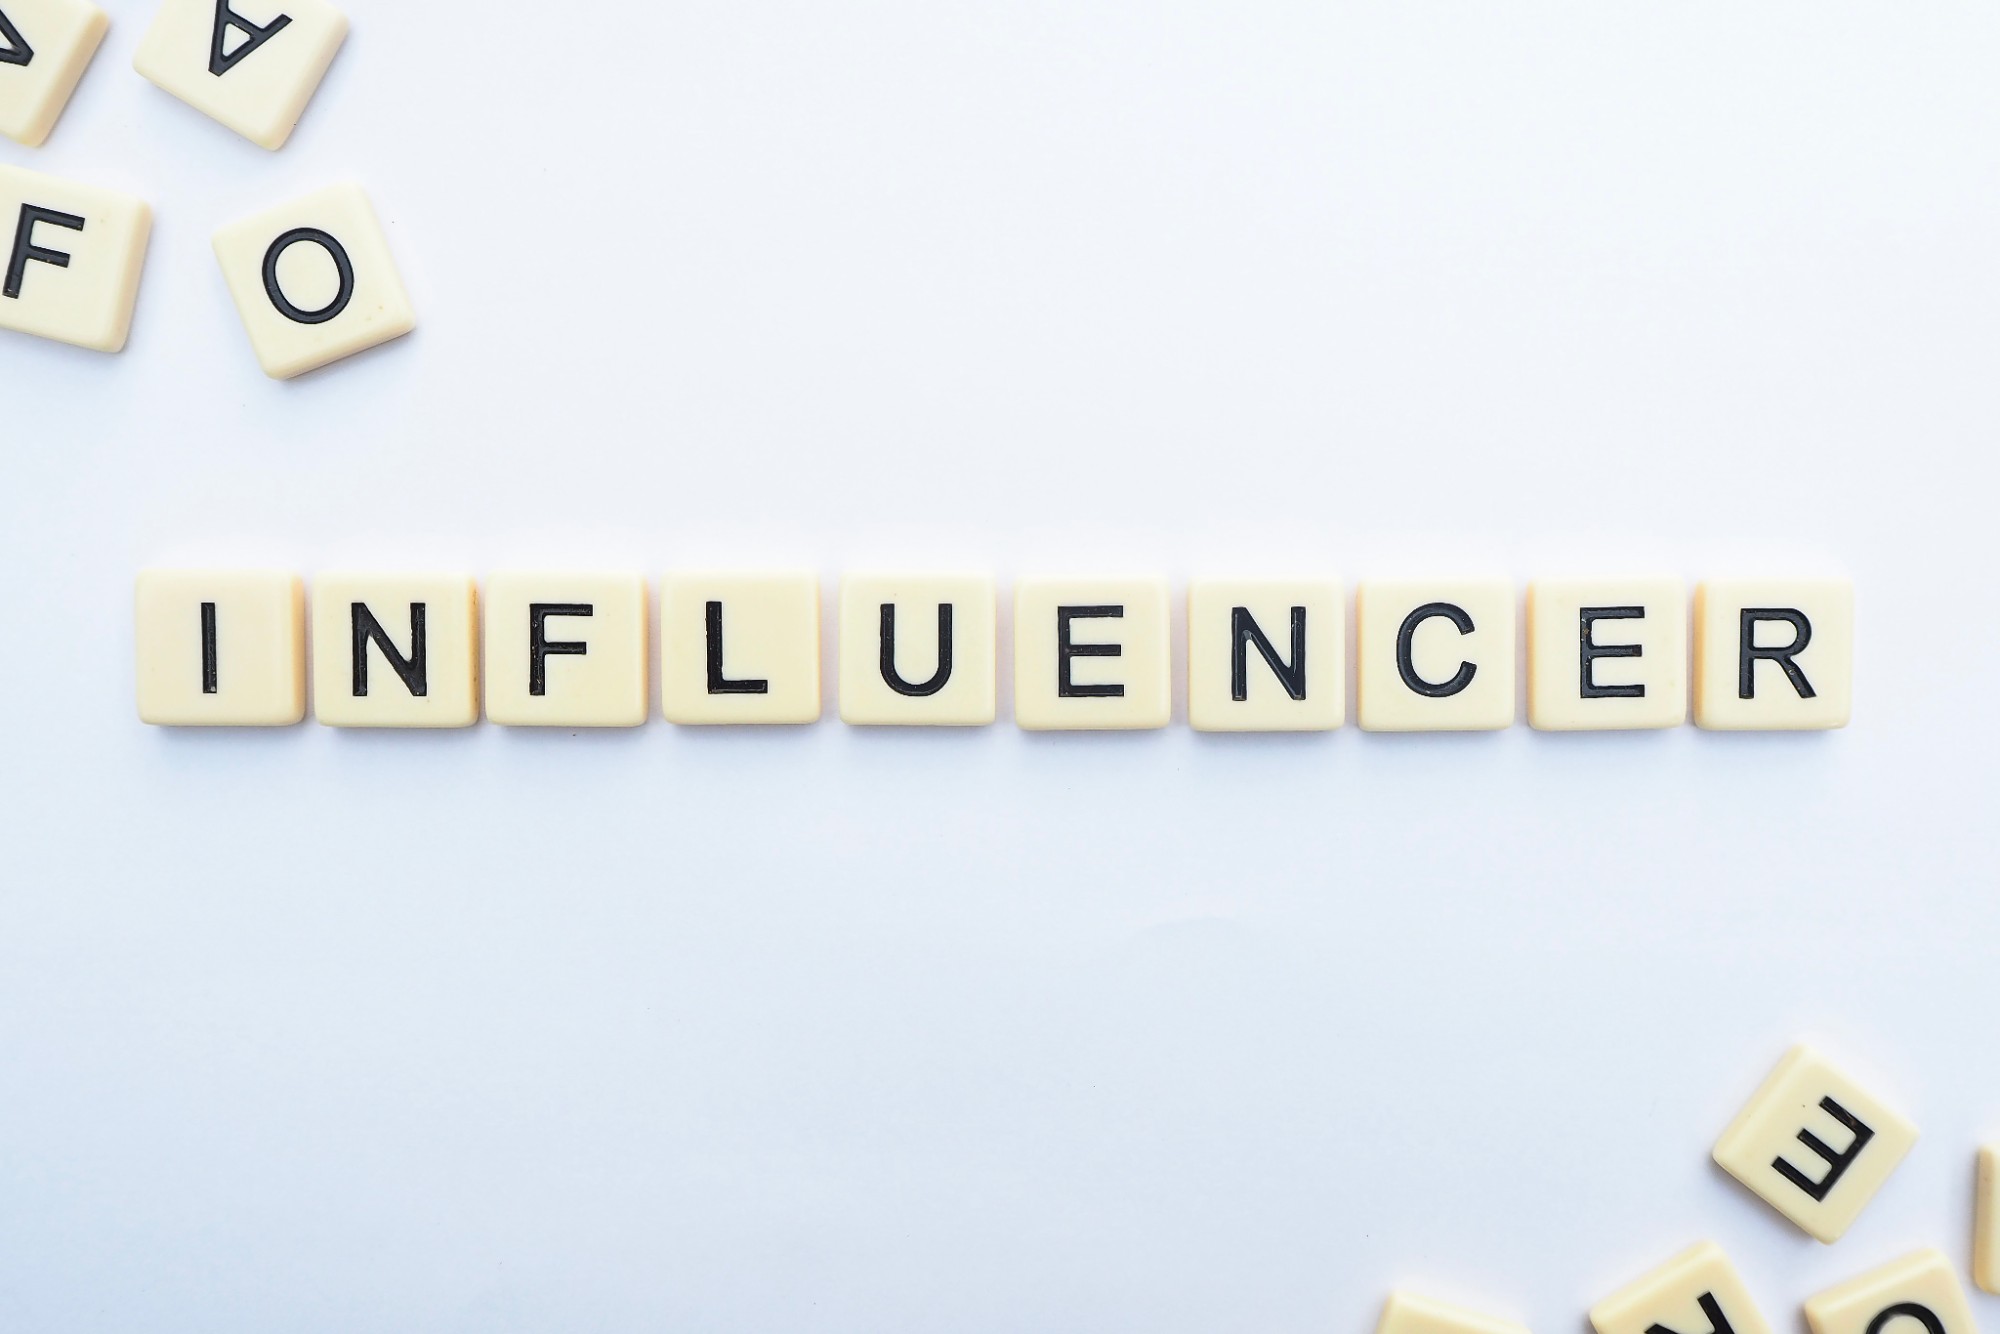 Influencer marketing: 7 tips to know before starting your first campaign